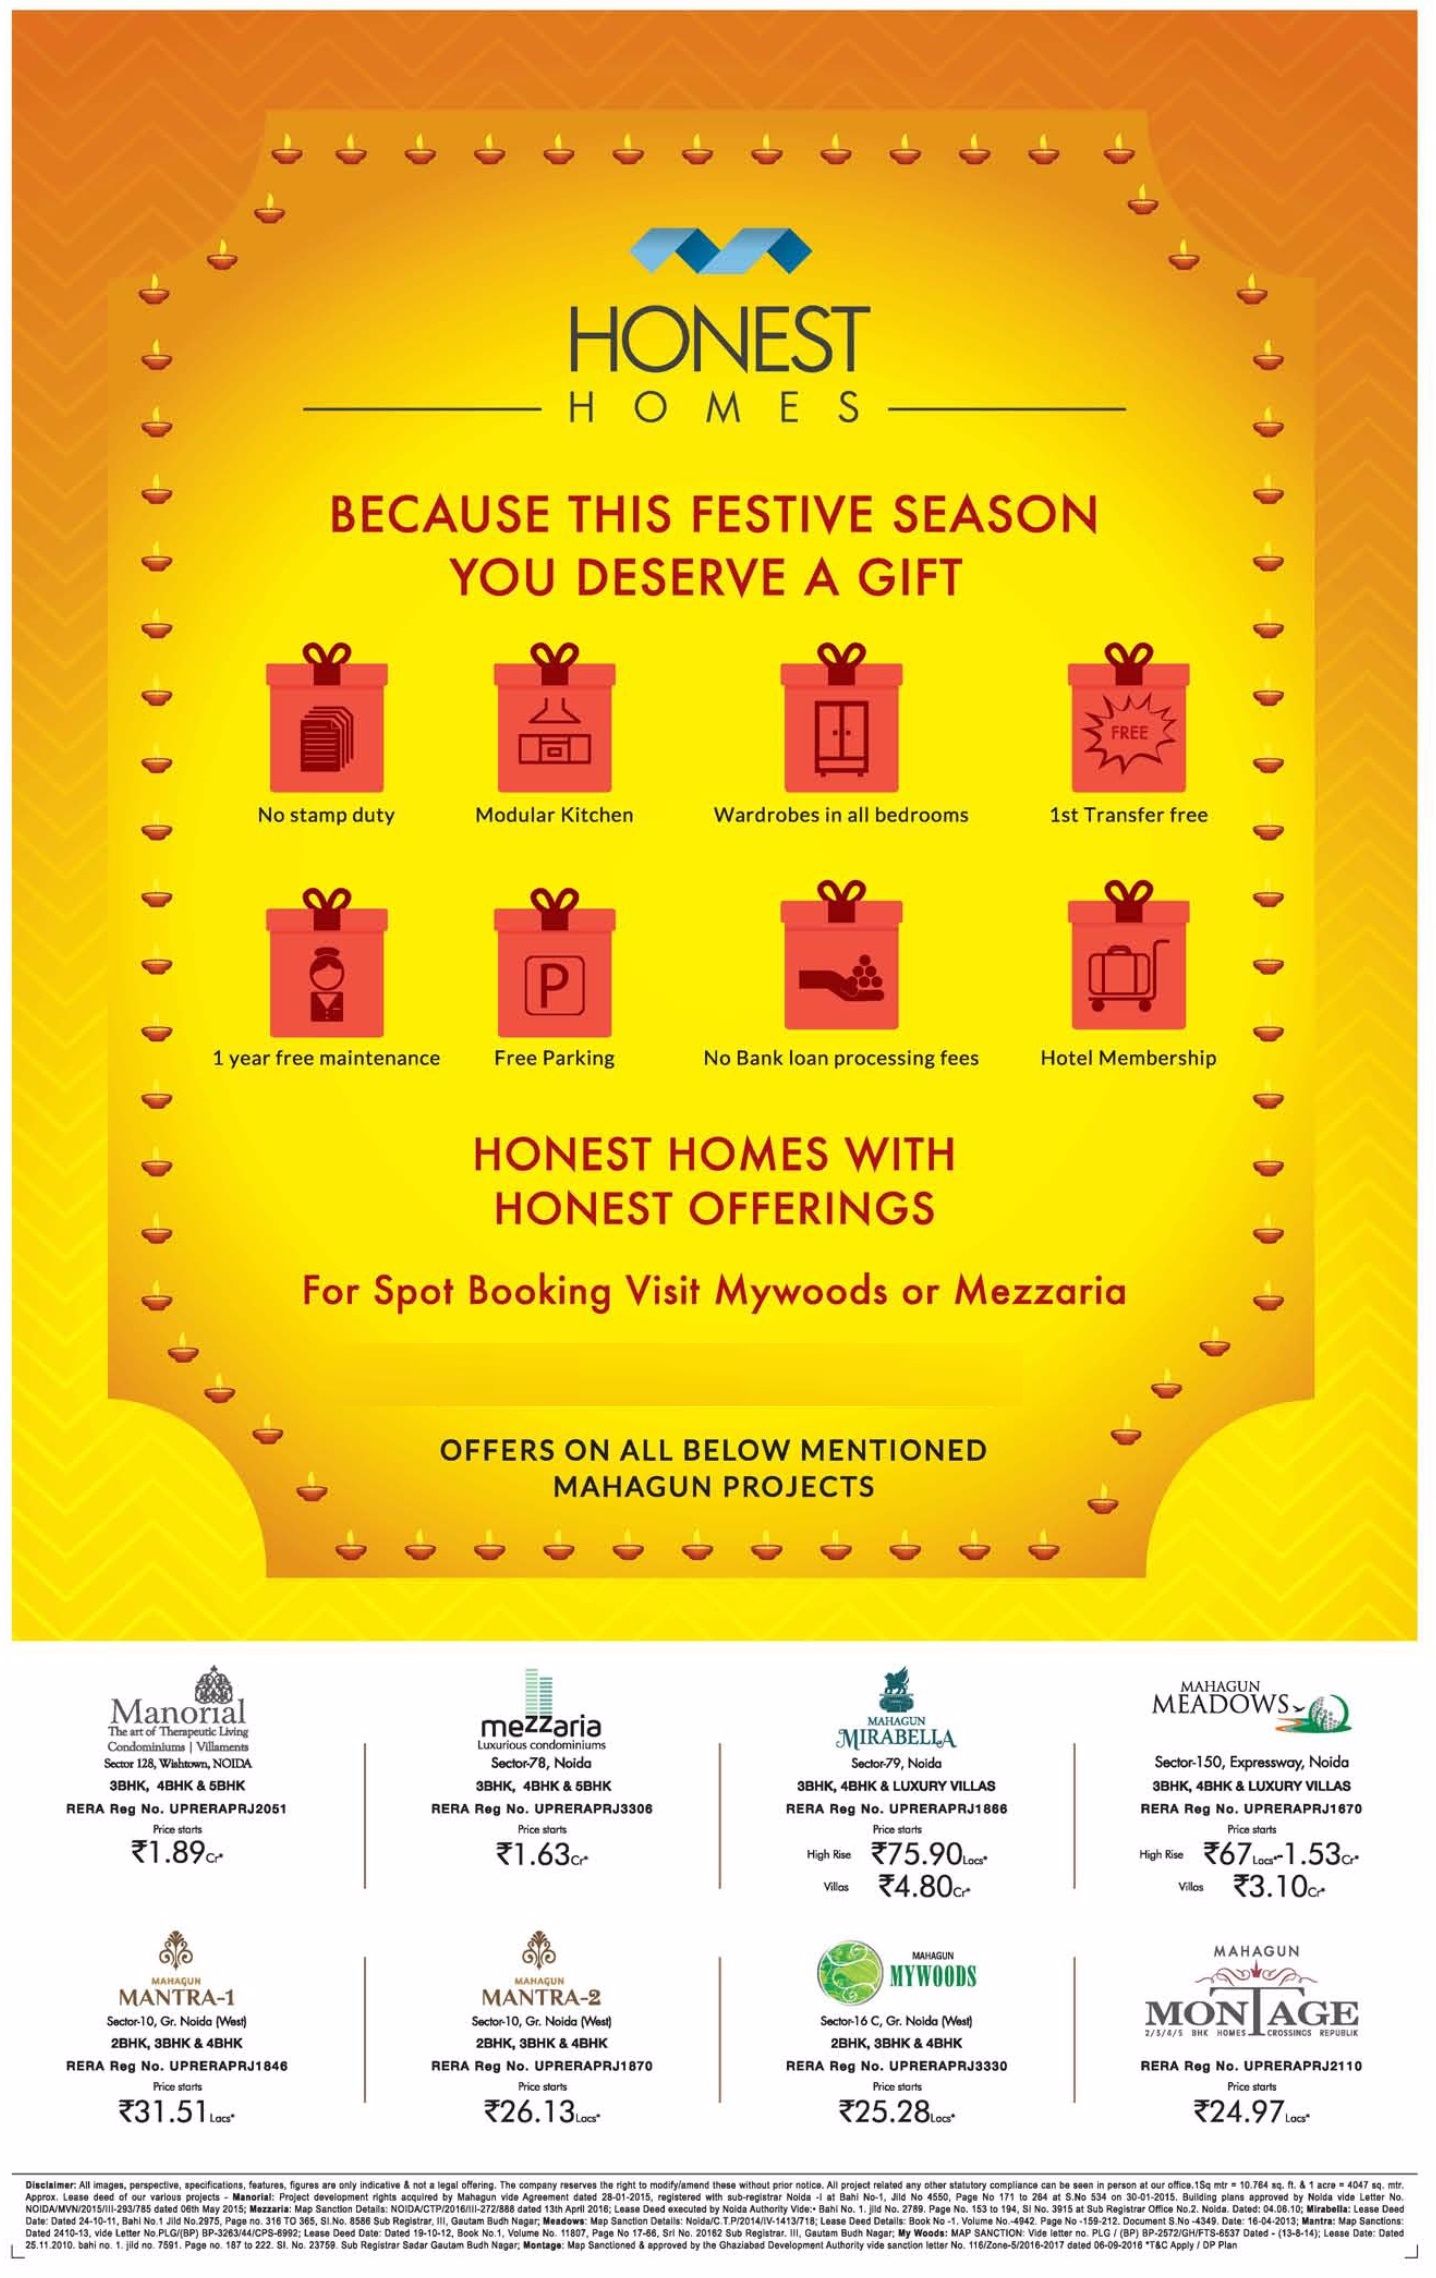 This festive season book honest homes with honest offerings at Mahagun Projects Update